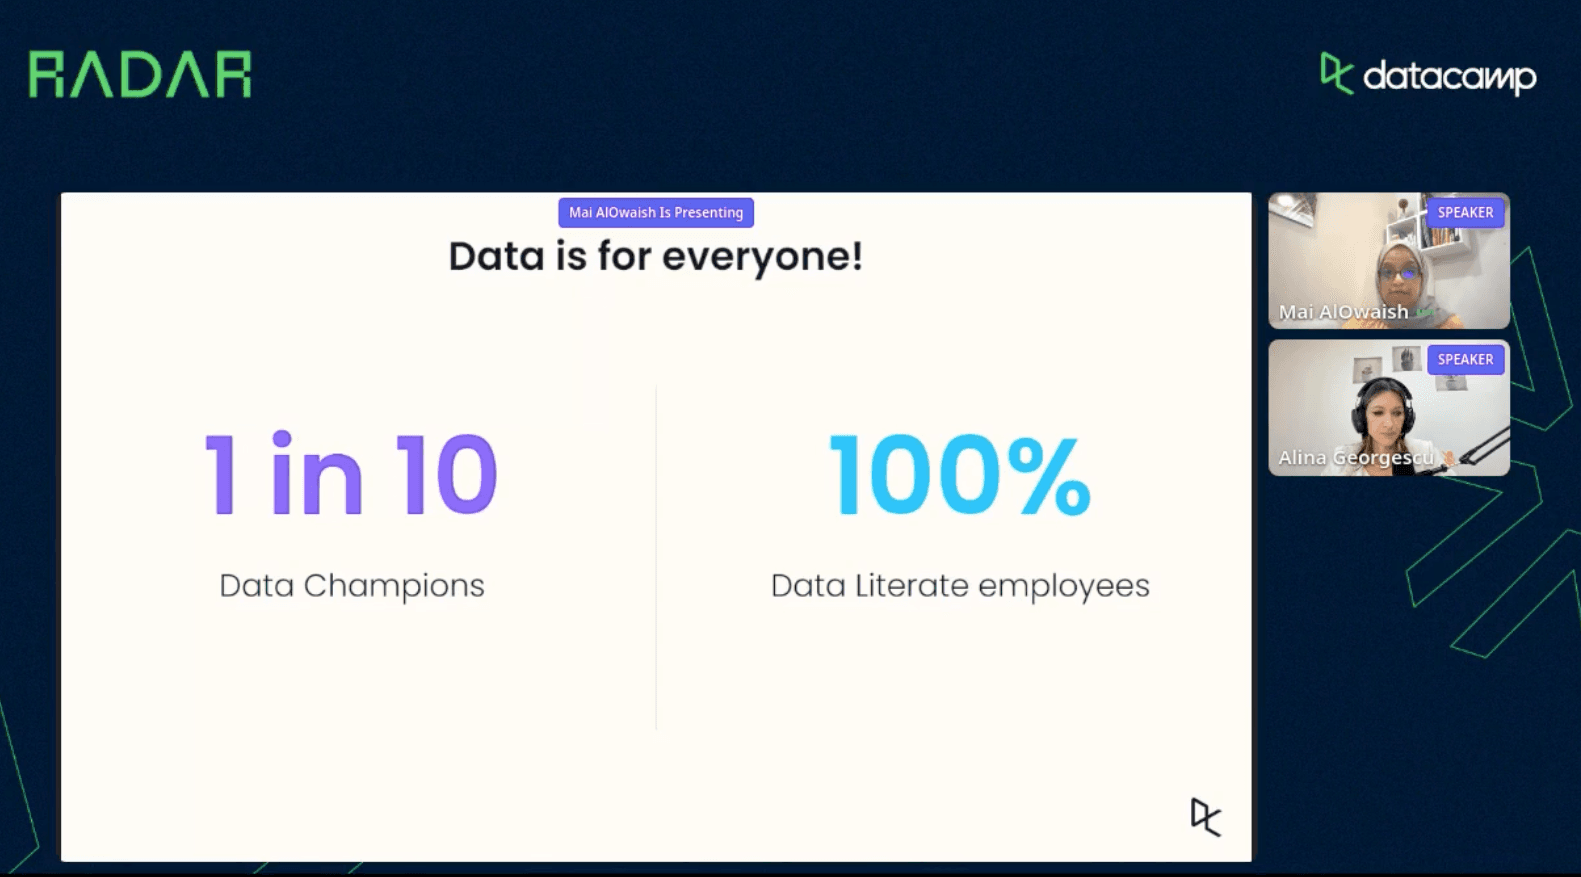 Data is for everyone slide